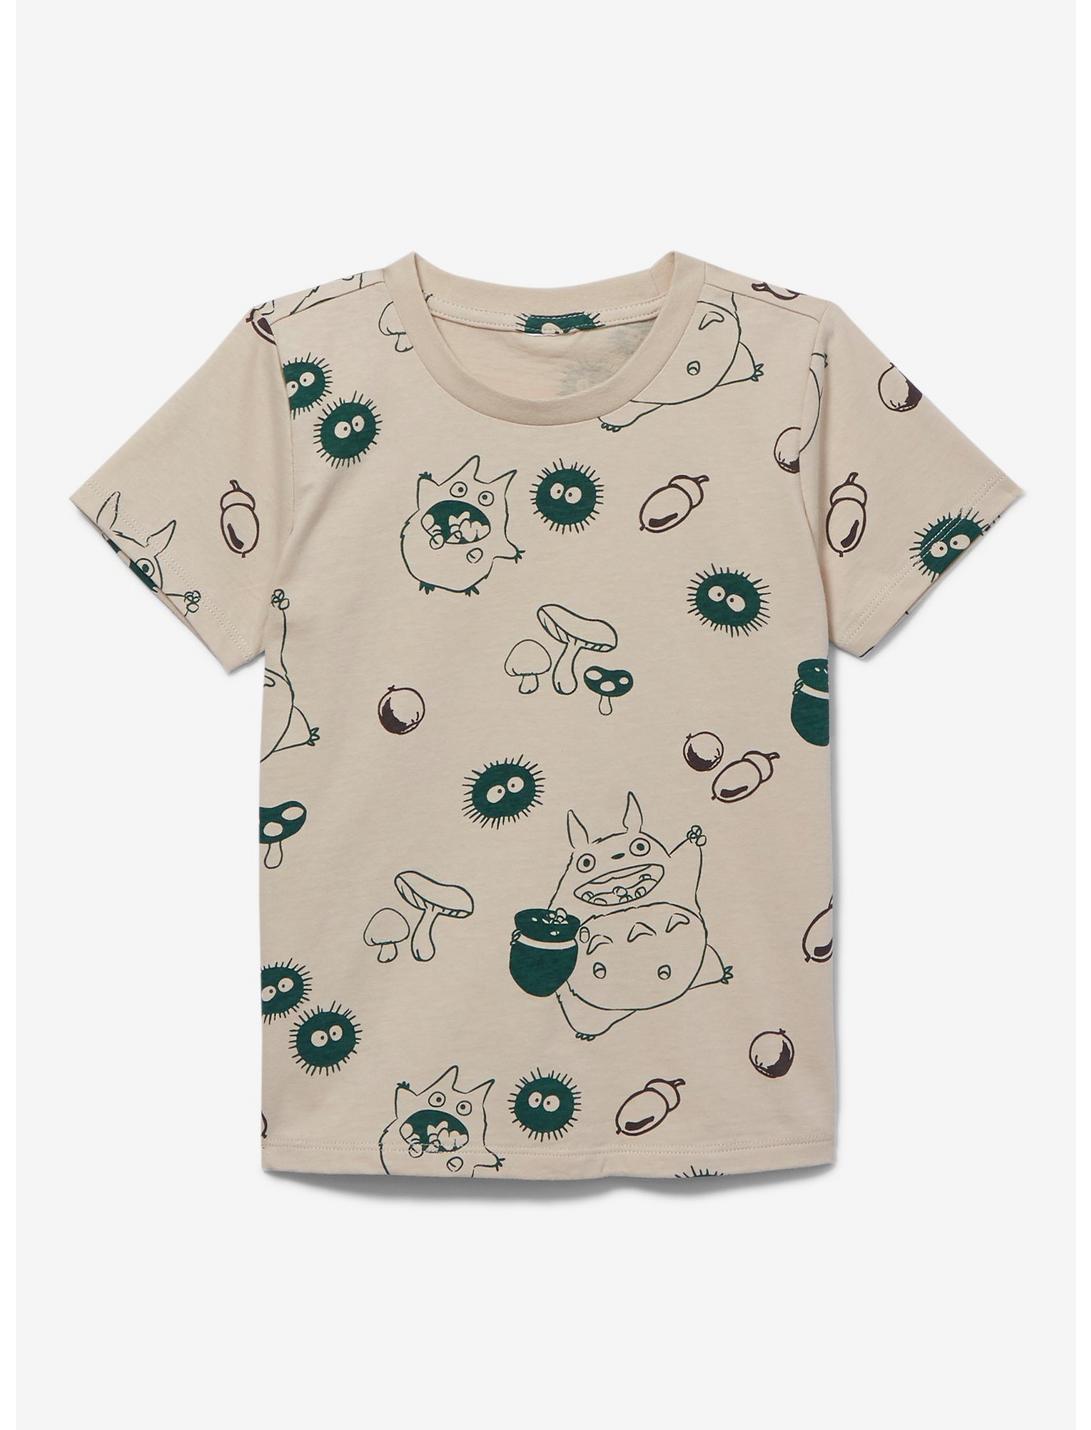 Our Universe Studio Ghibli My Neighbor Totoro Character Allover Print Toddler T-Shirt - BoxLunch Exclusive, NATURAL, hi-res